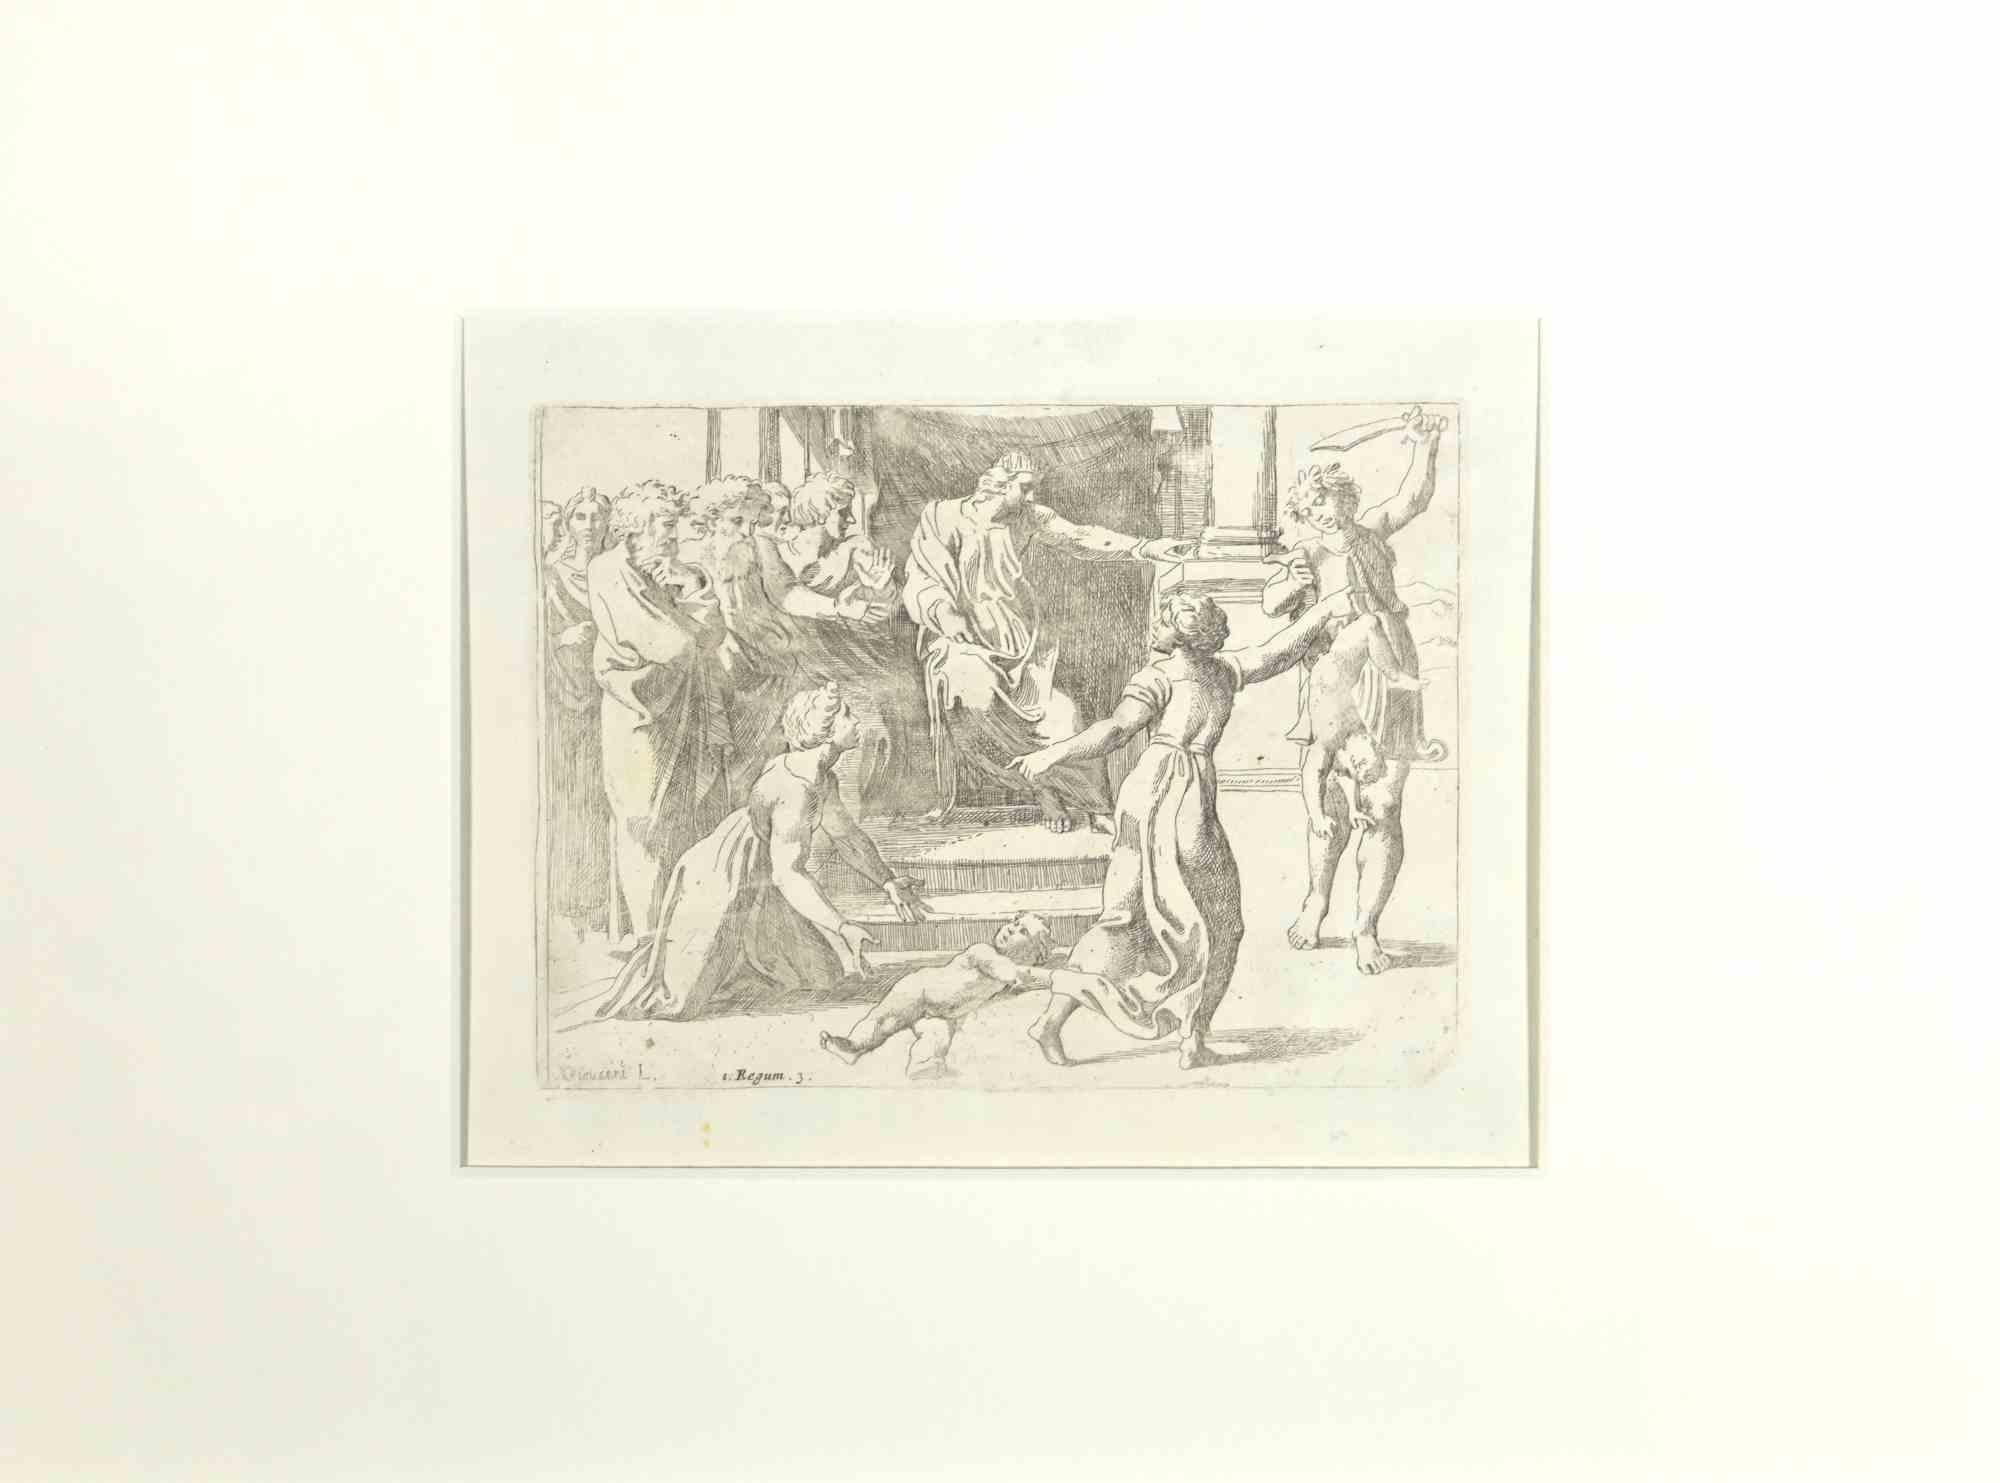 Giovanni Lanfranco (Terenzo, 1582 - Rome, 1647) Figurative Print - Old Testament Story - Etching by Giovanni Lanfranco - 1607s